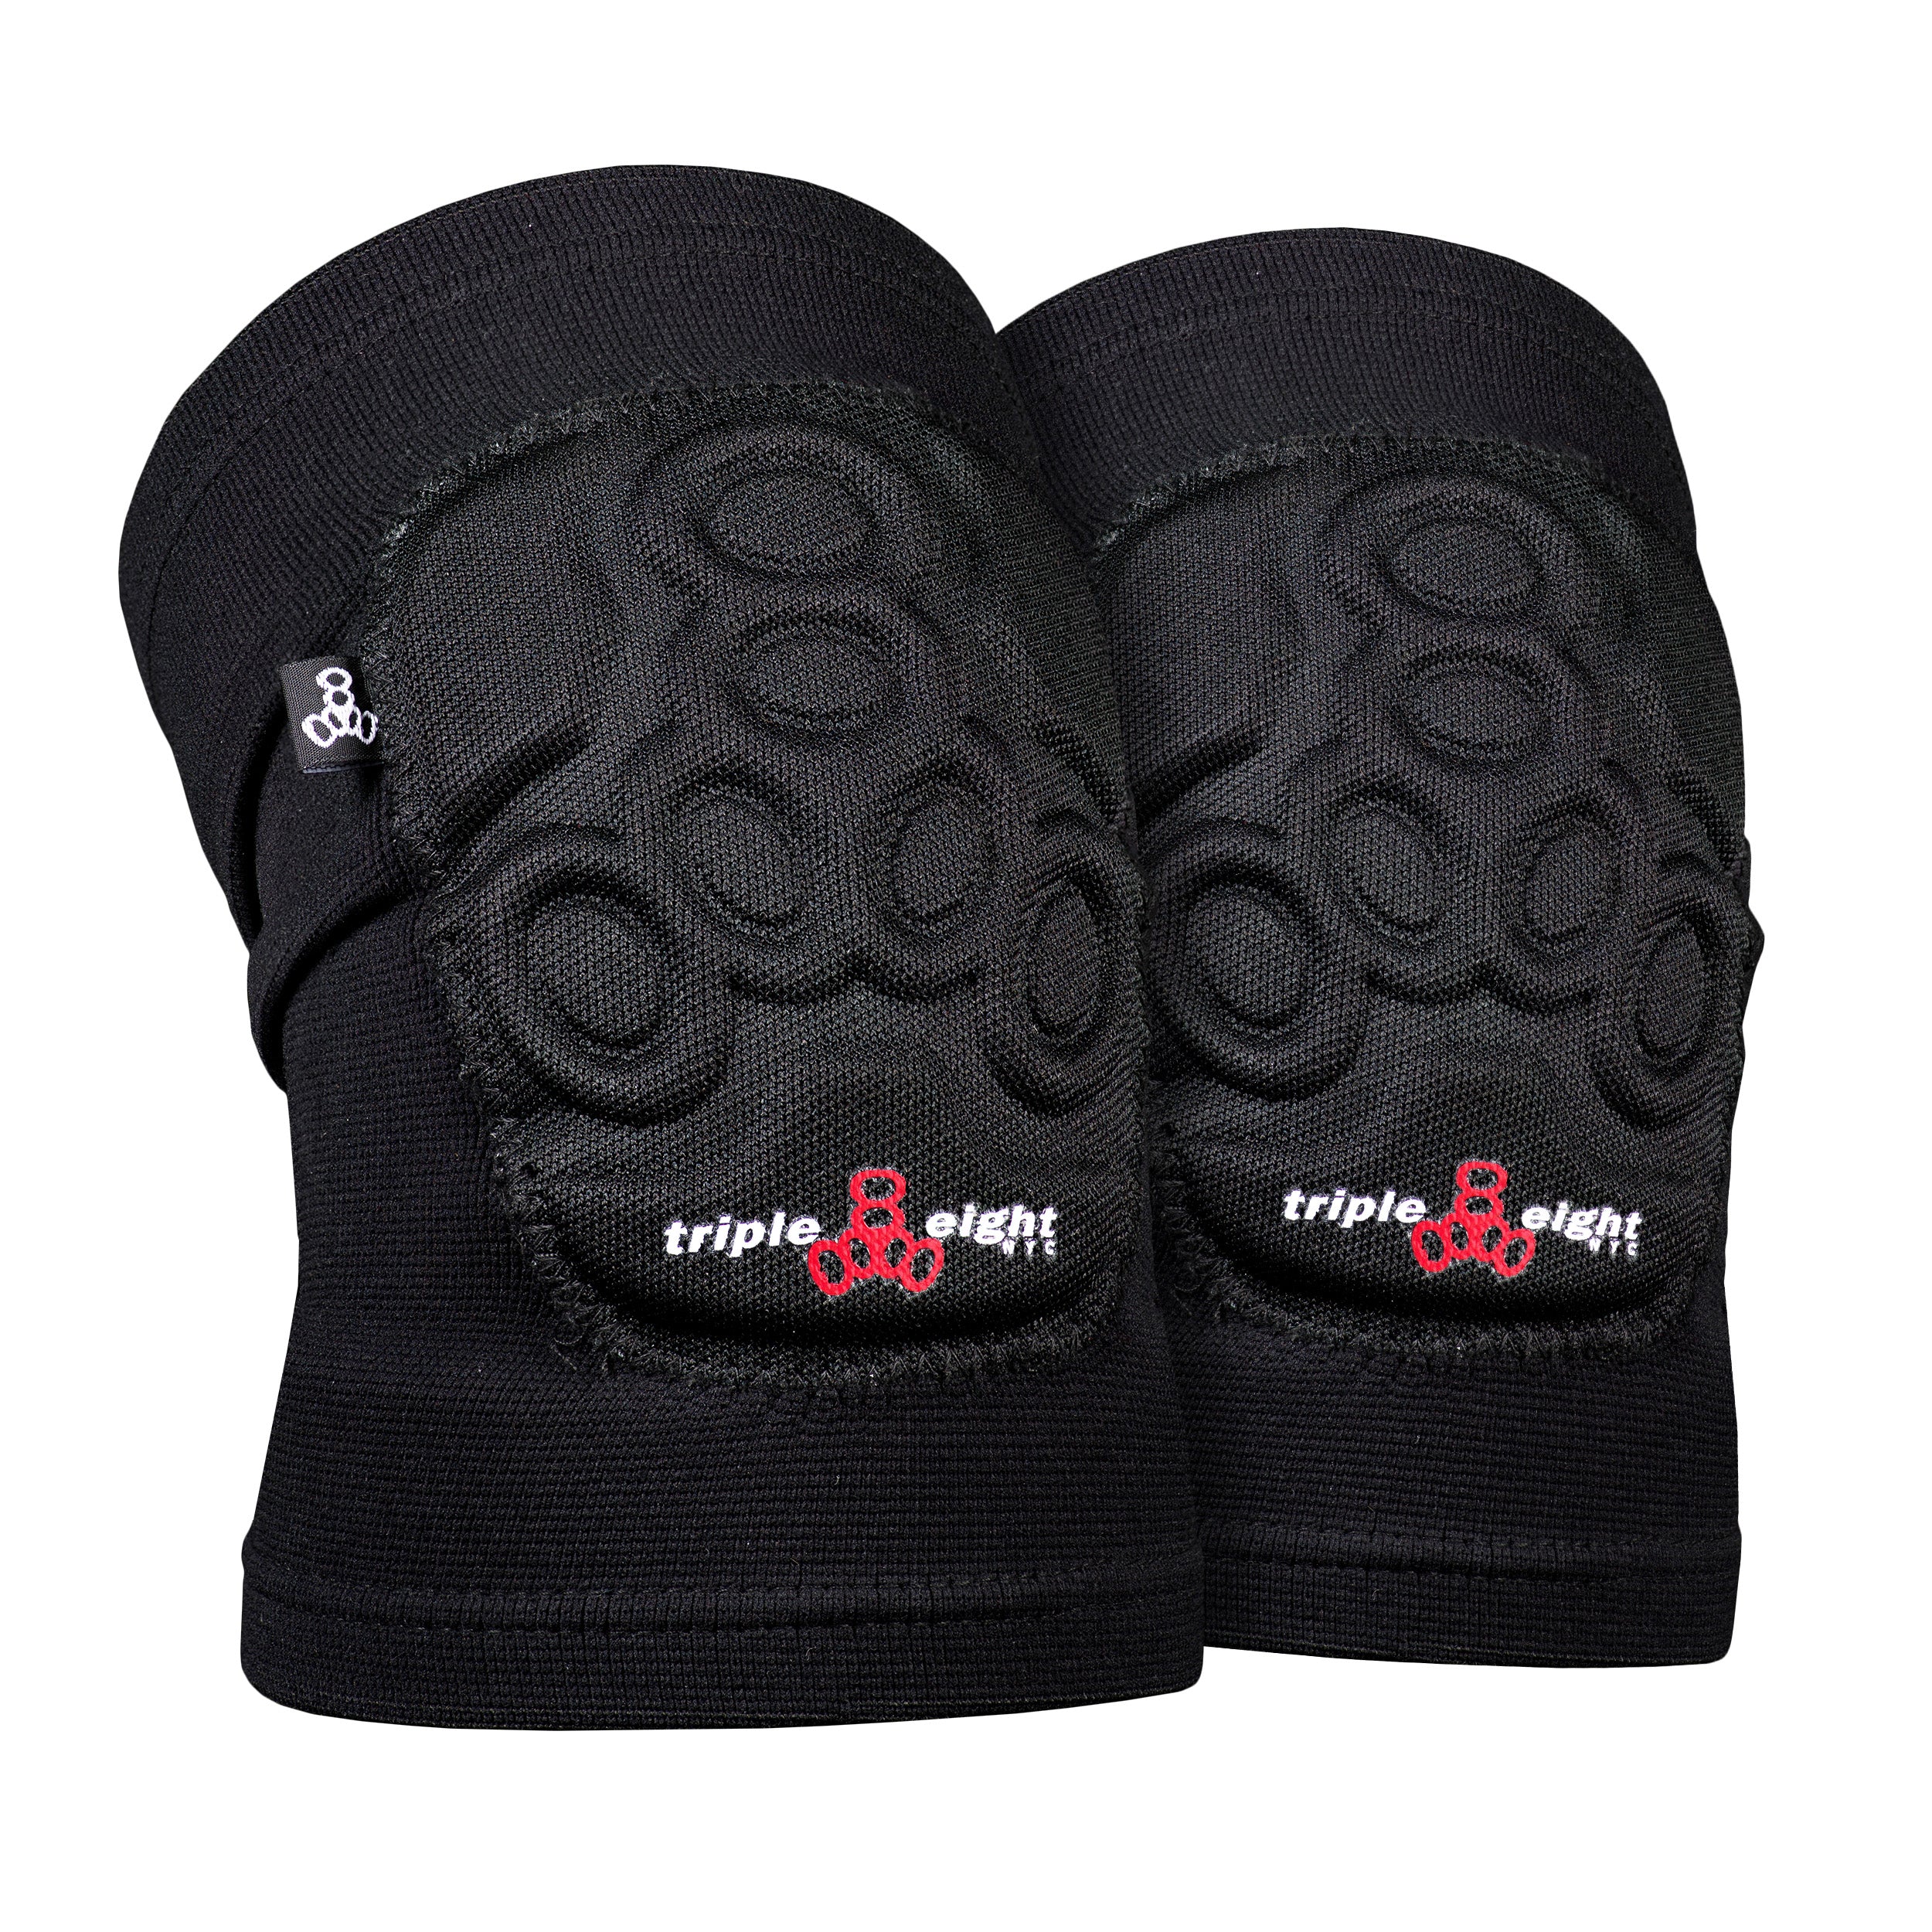 Covert Knee and Elbow Pads by Triple Eight